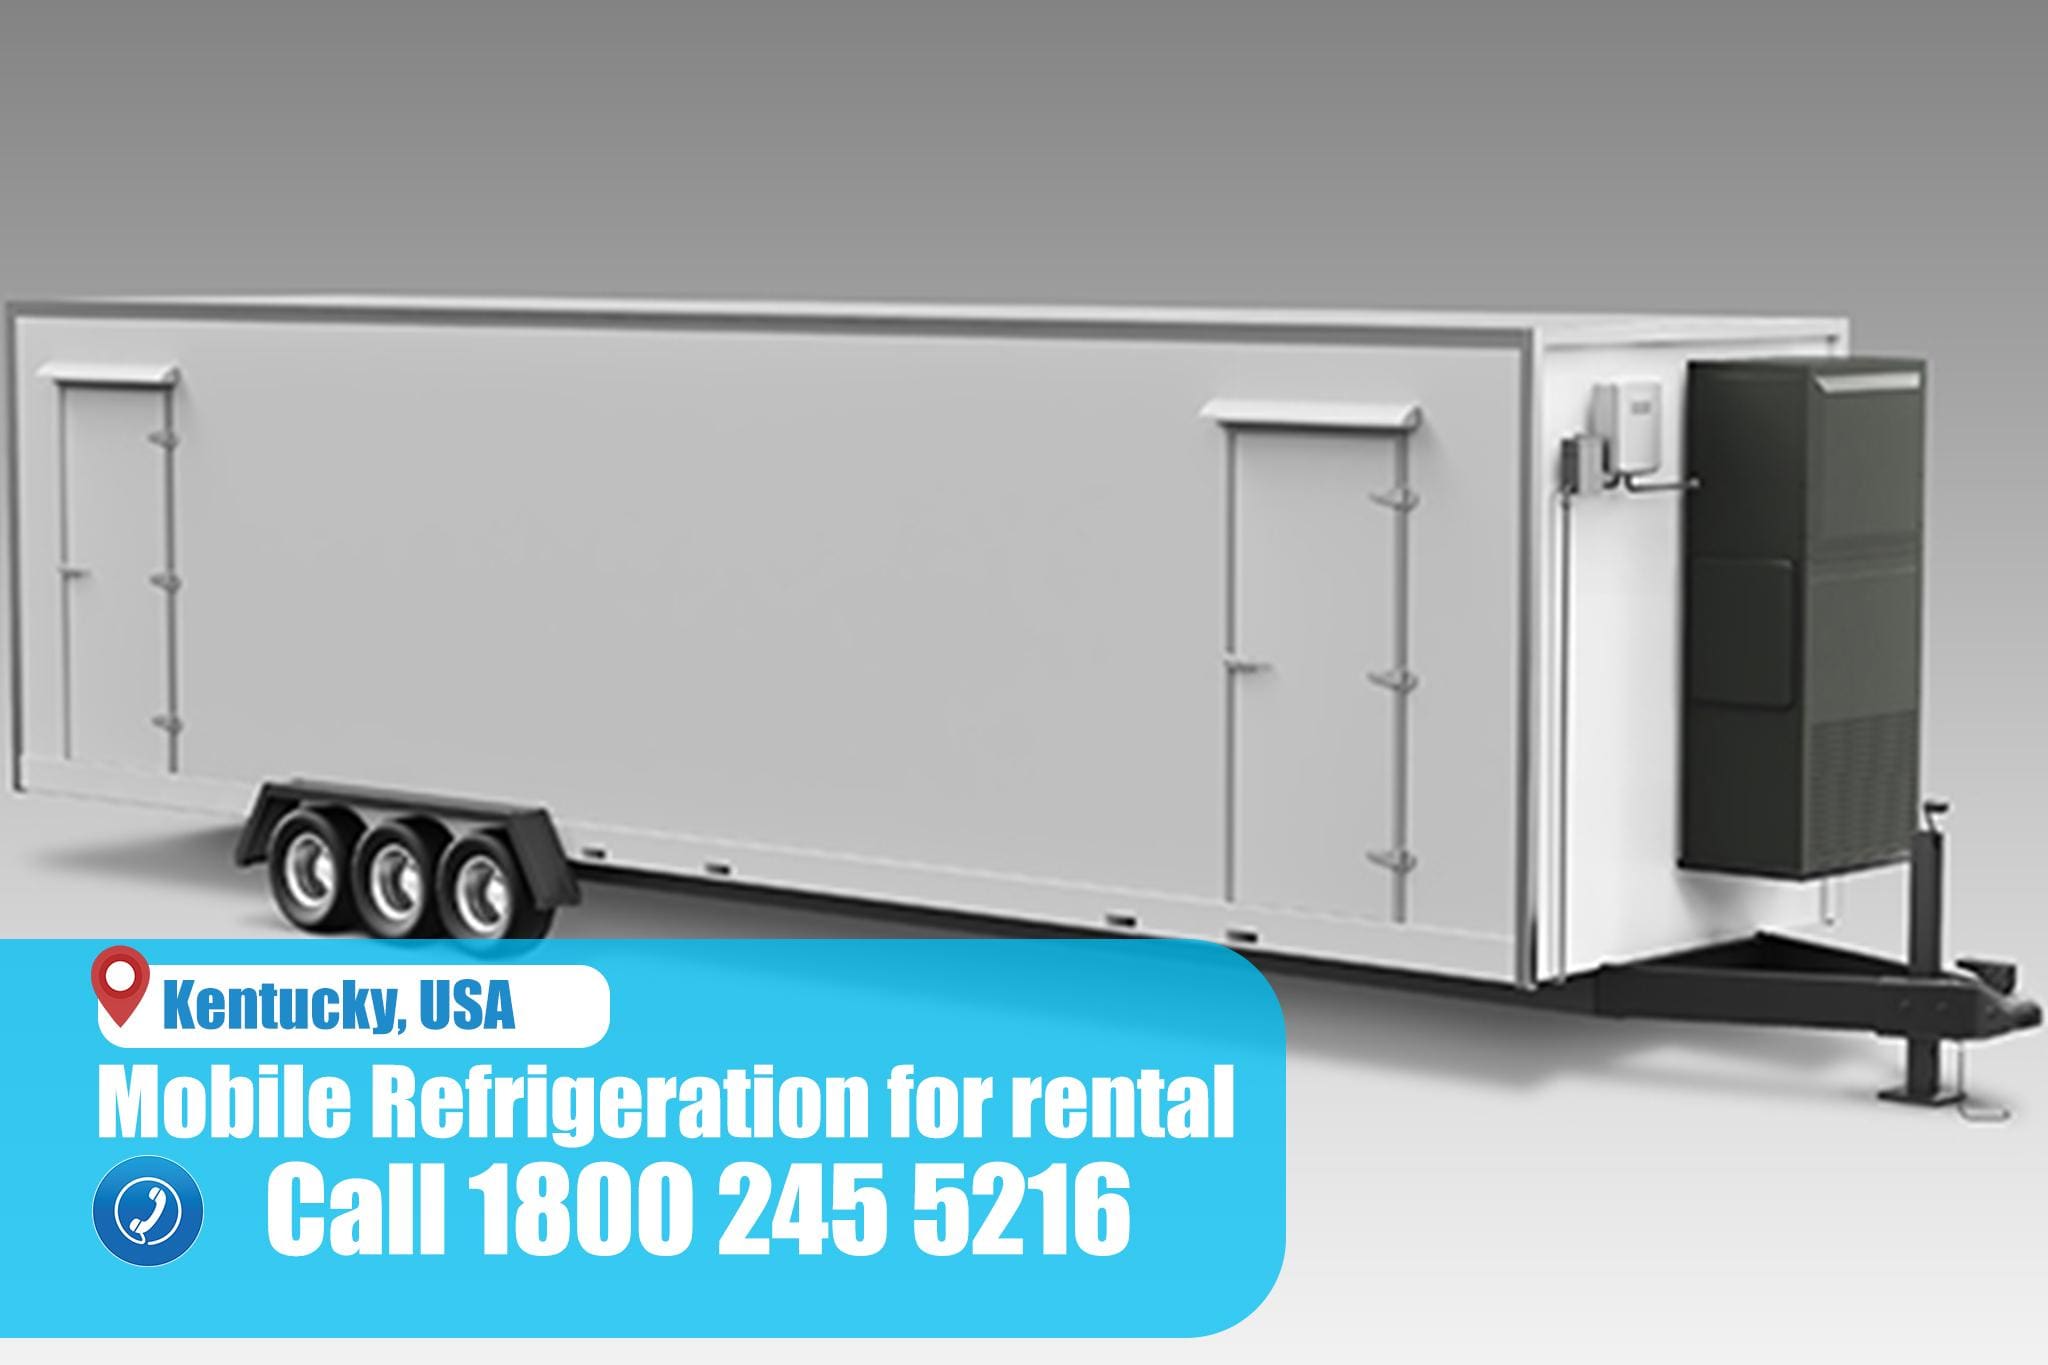 Mobile Refrigeration for rental in kentucky